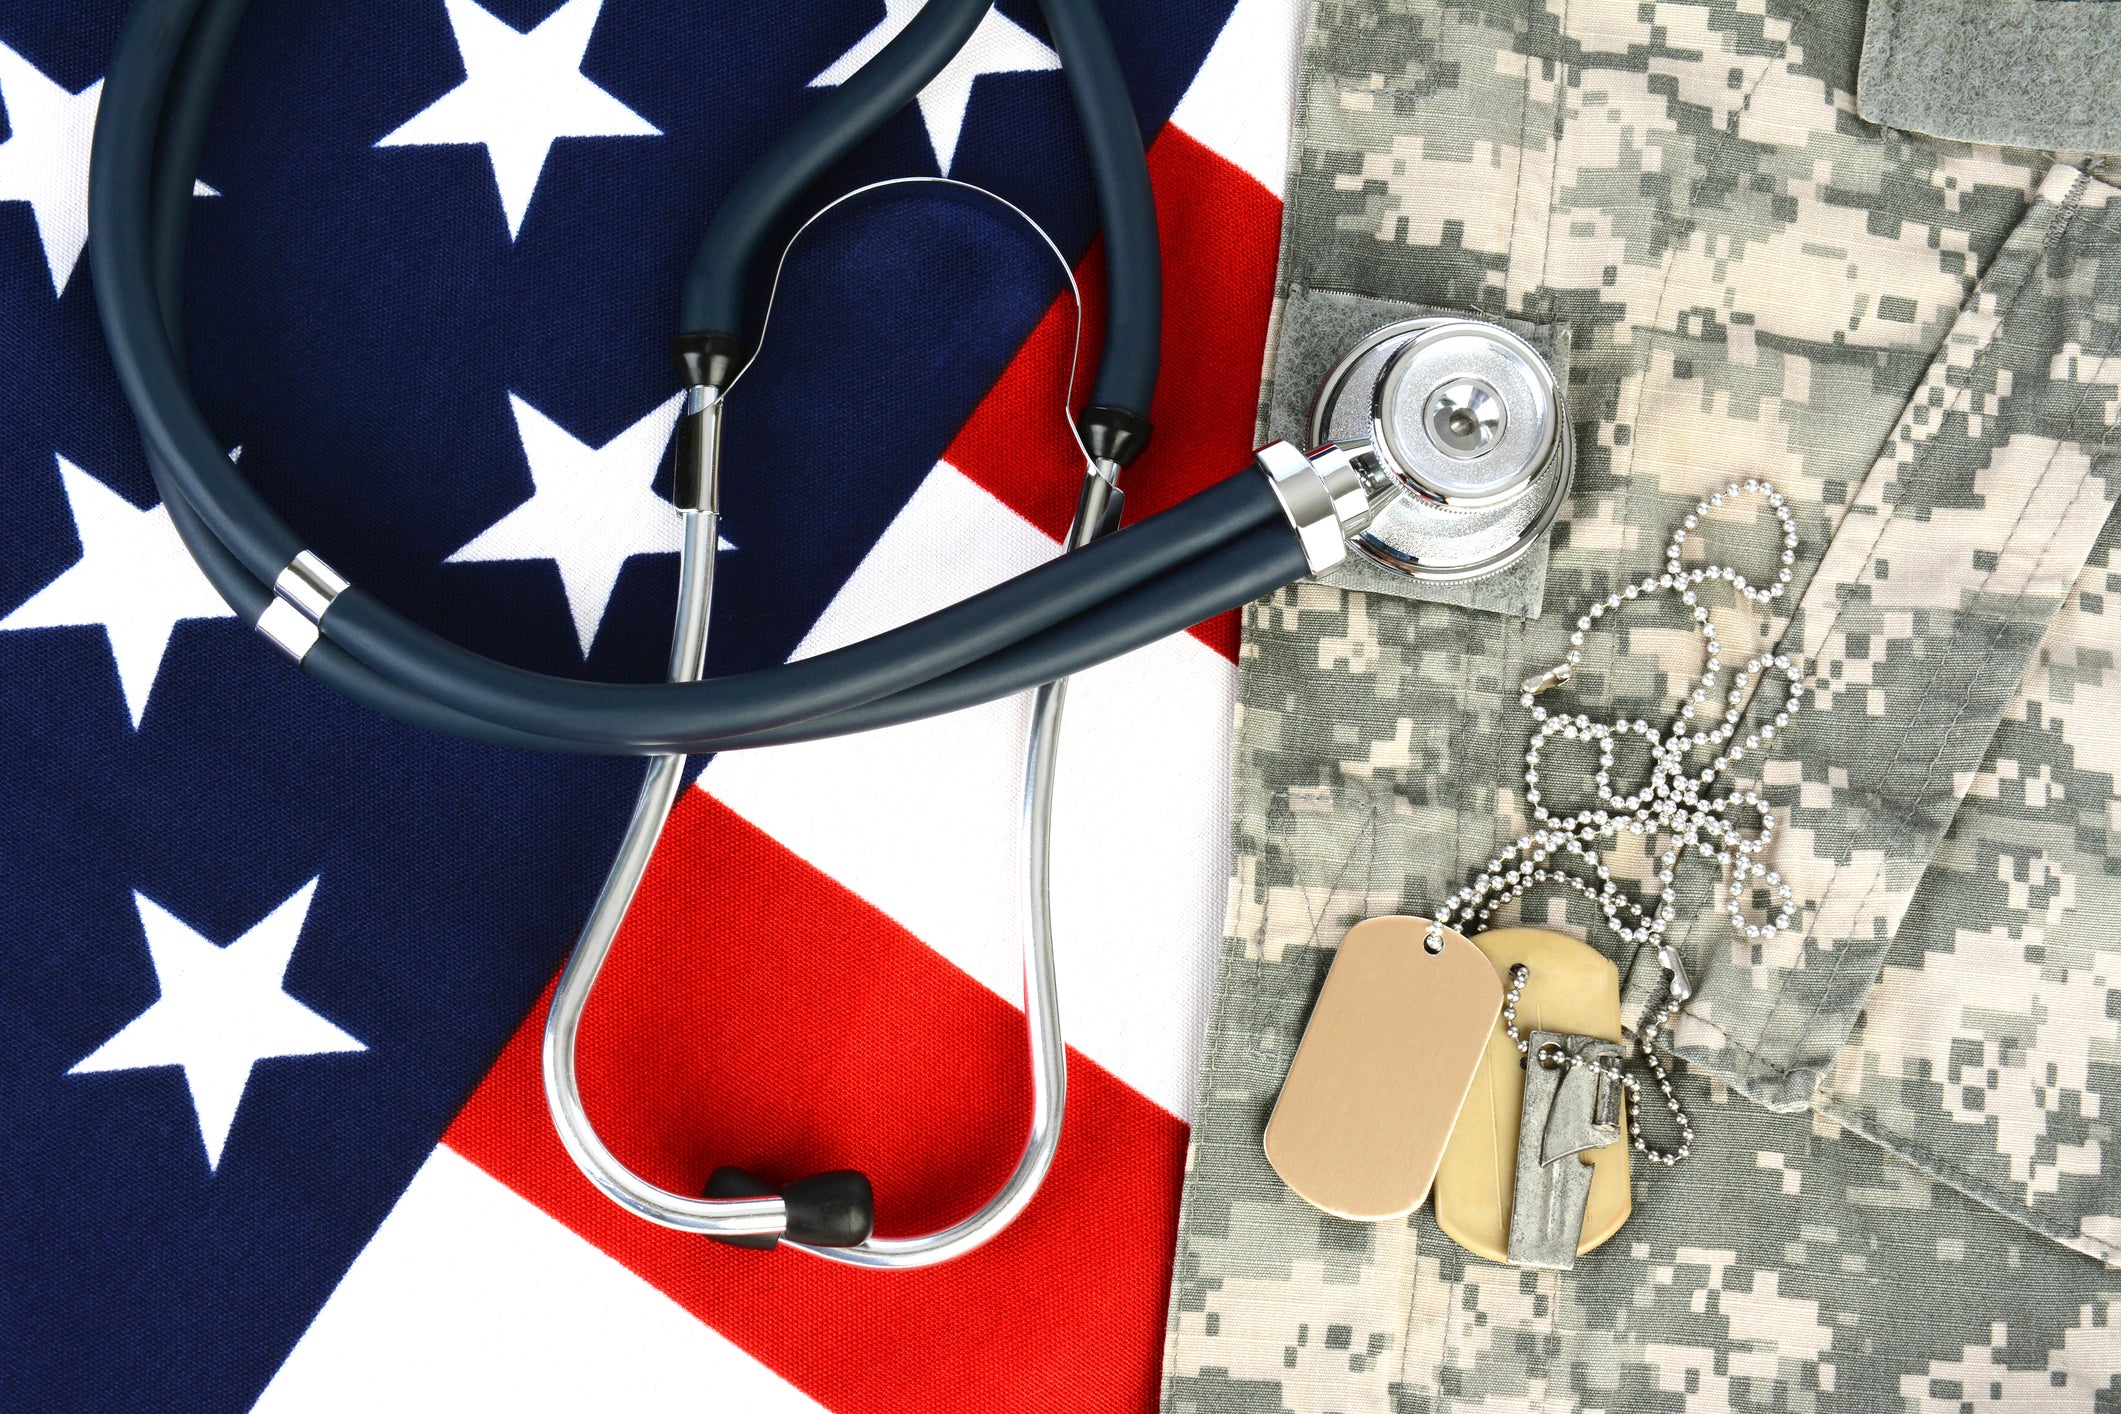 Military fatigues and dog tags on an American Flag with a stethoscope to illustrate health care in the armed services.